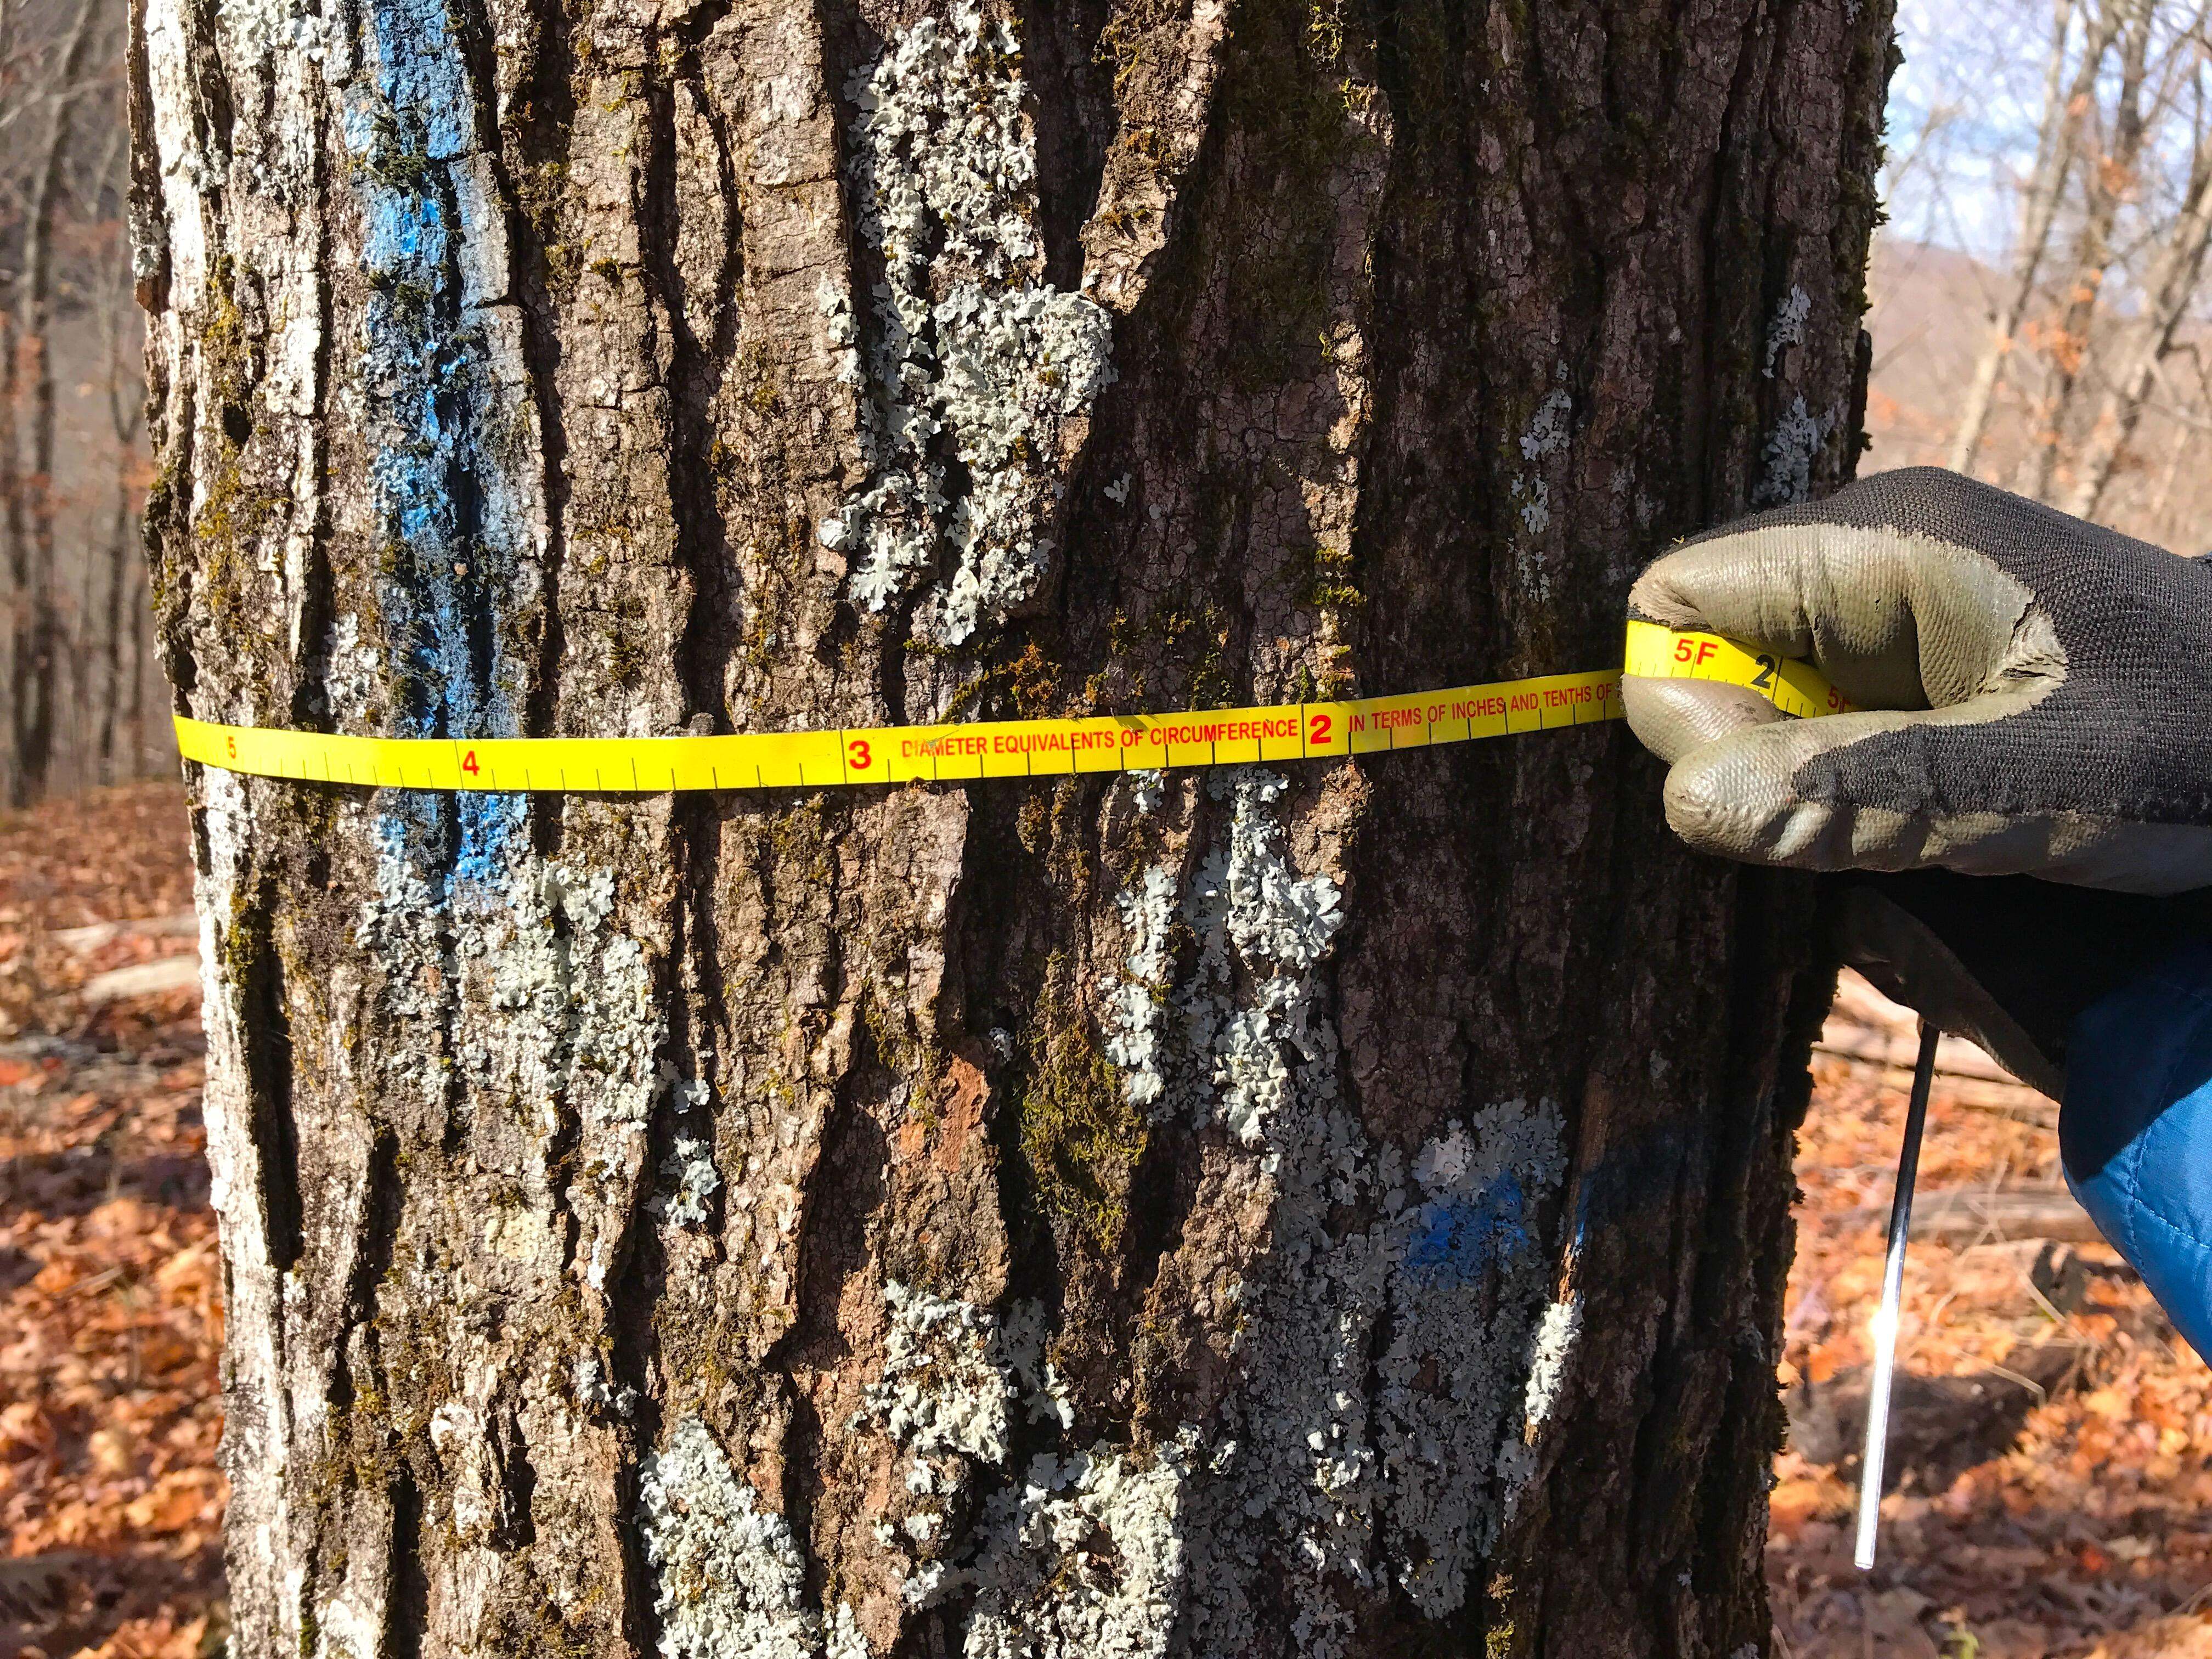 A forester uses a thin, yellow measuring tape to measure the circumfrence of a mature tree.